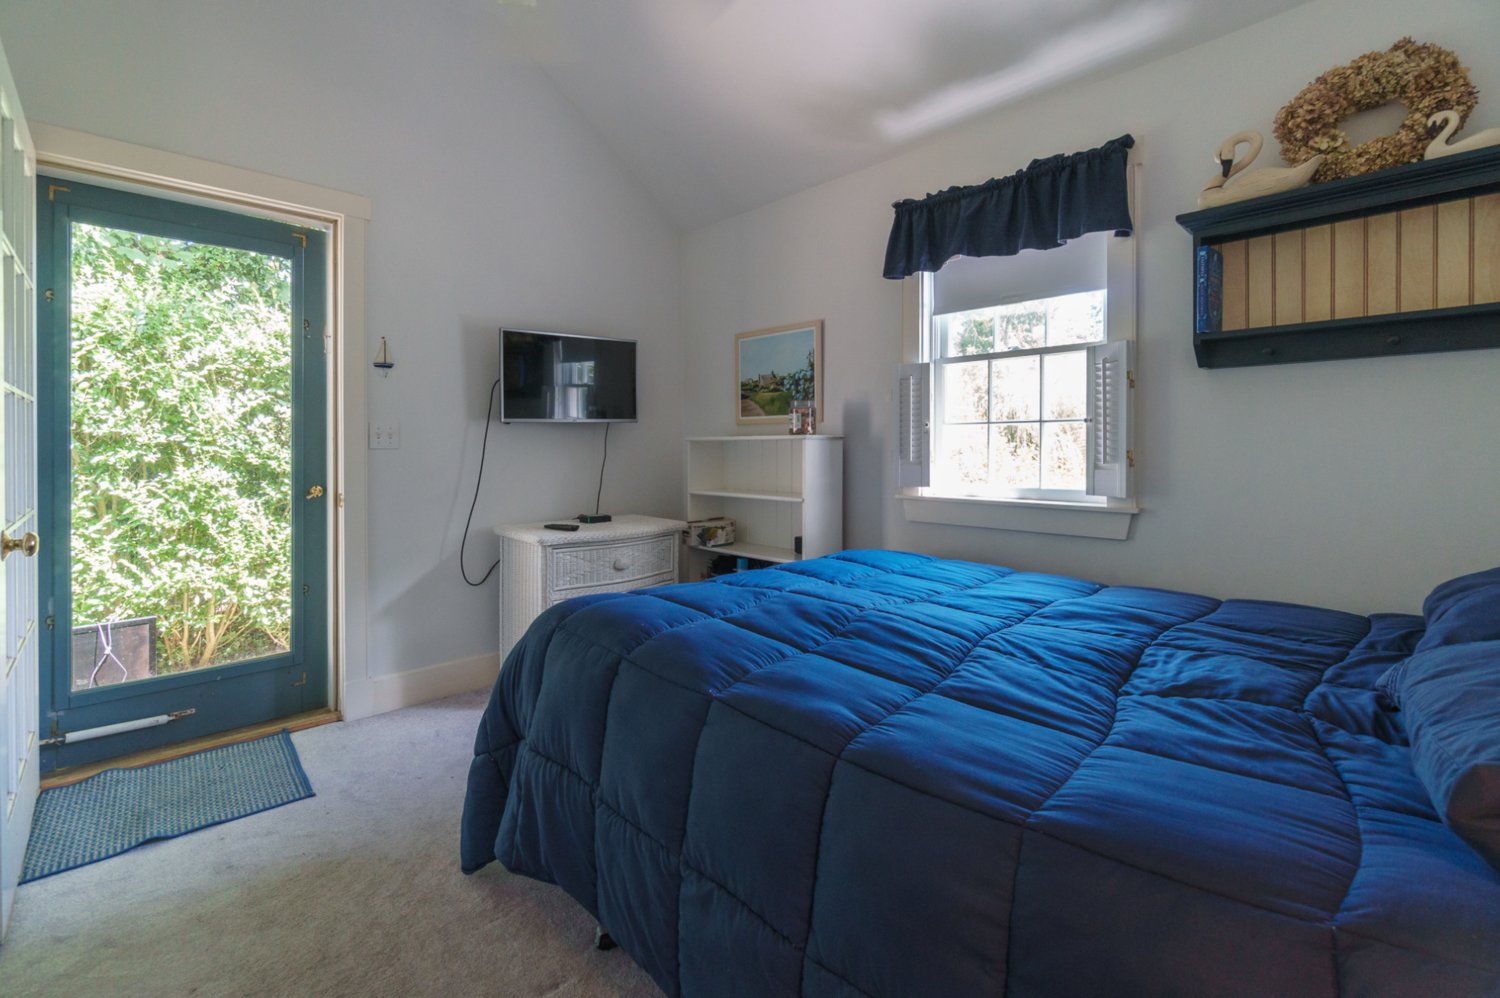 Each of the home’s two bedrooms have high ceilings and an en-suite bathroom.